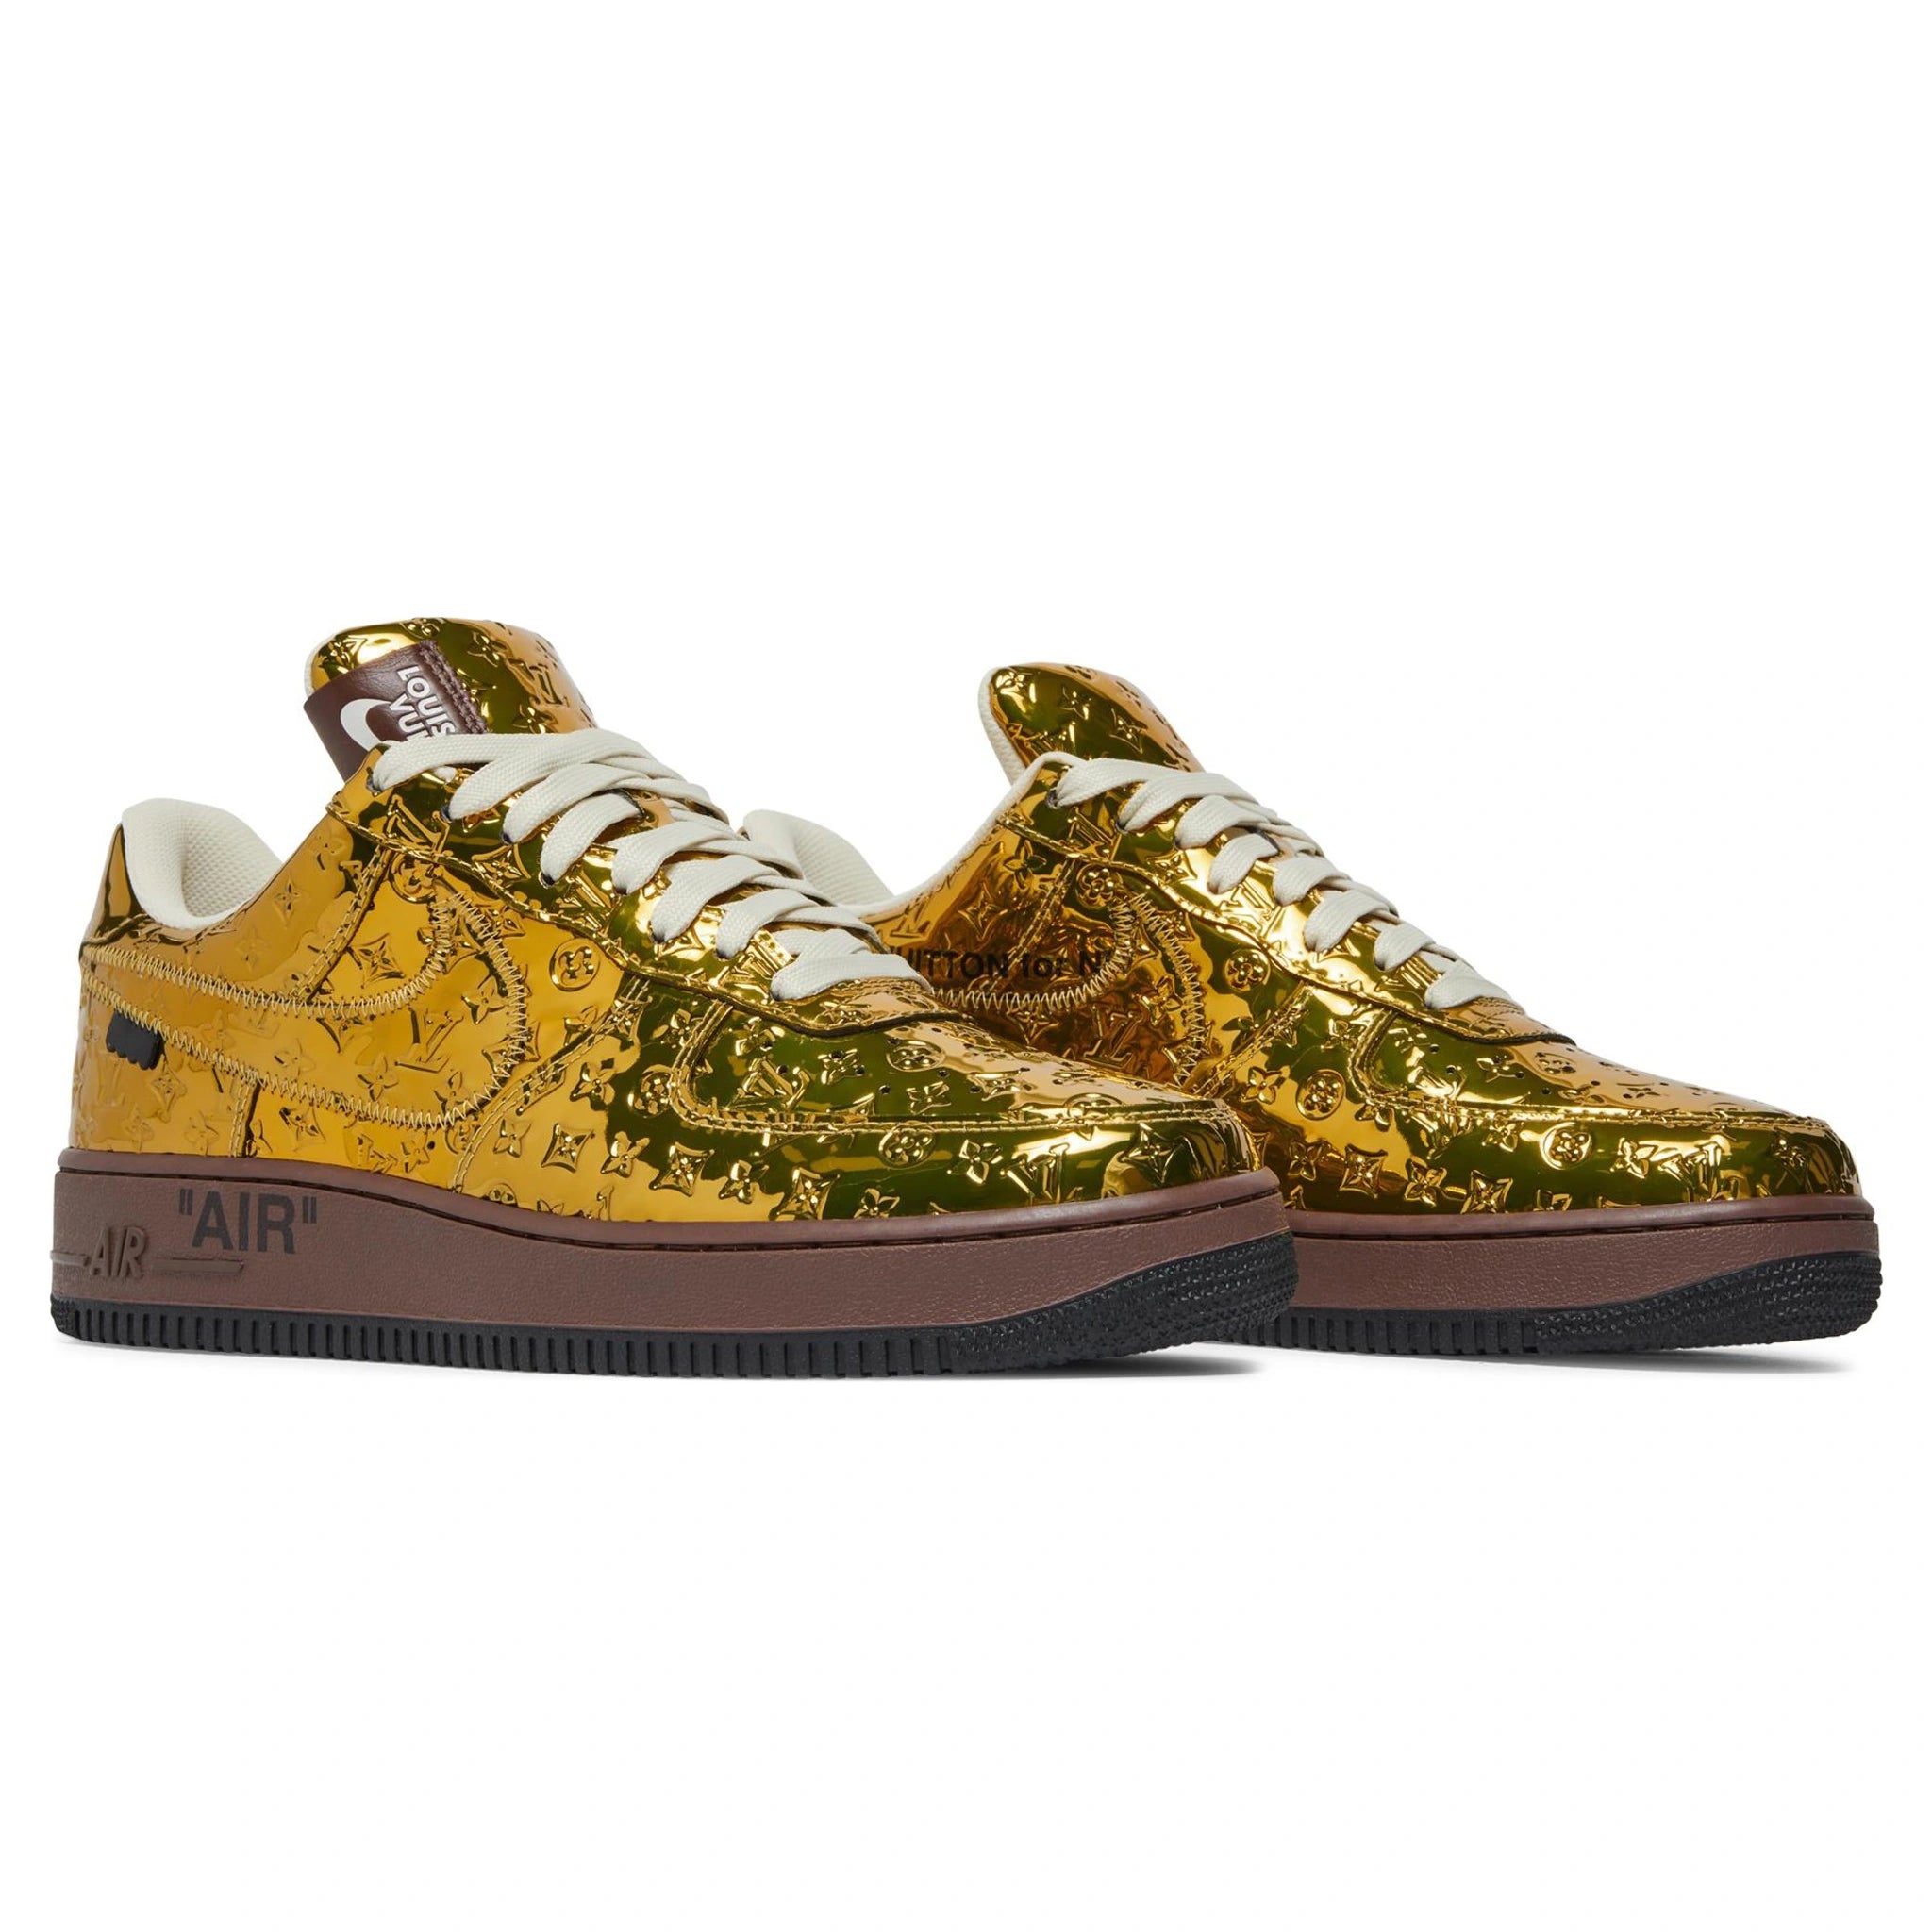 Front side view of Louis Vuitton x Nike Air Force 1 Low Metallic Gold 1A9VG1